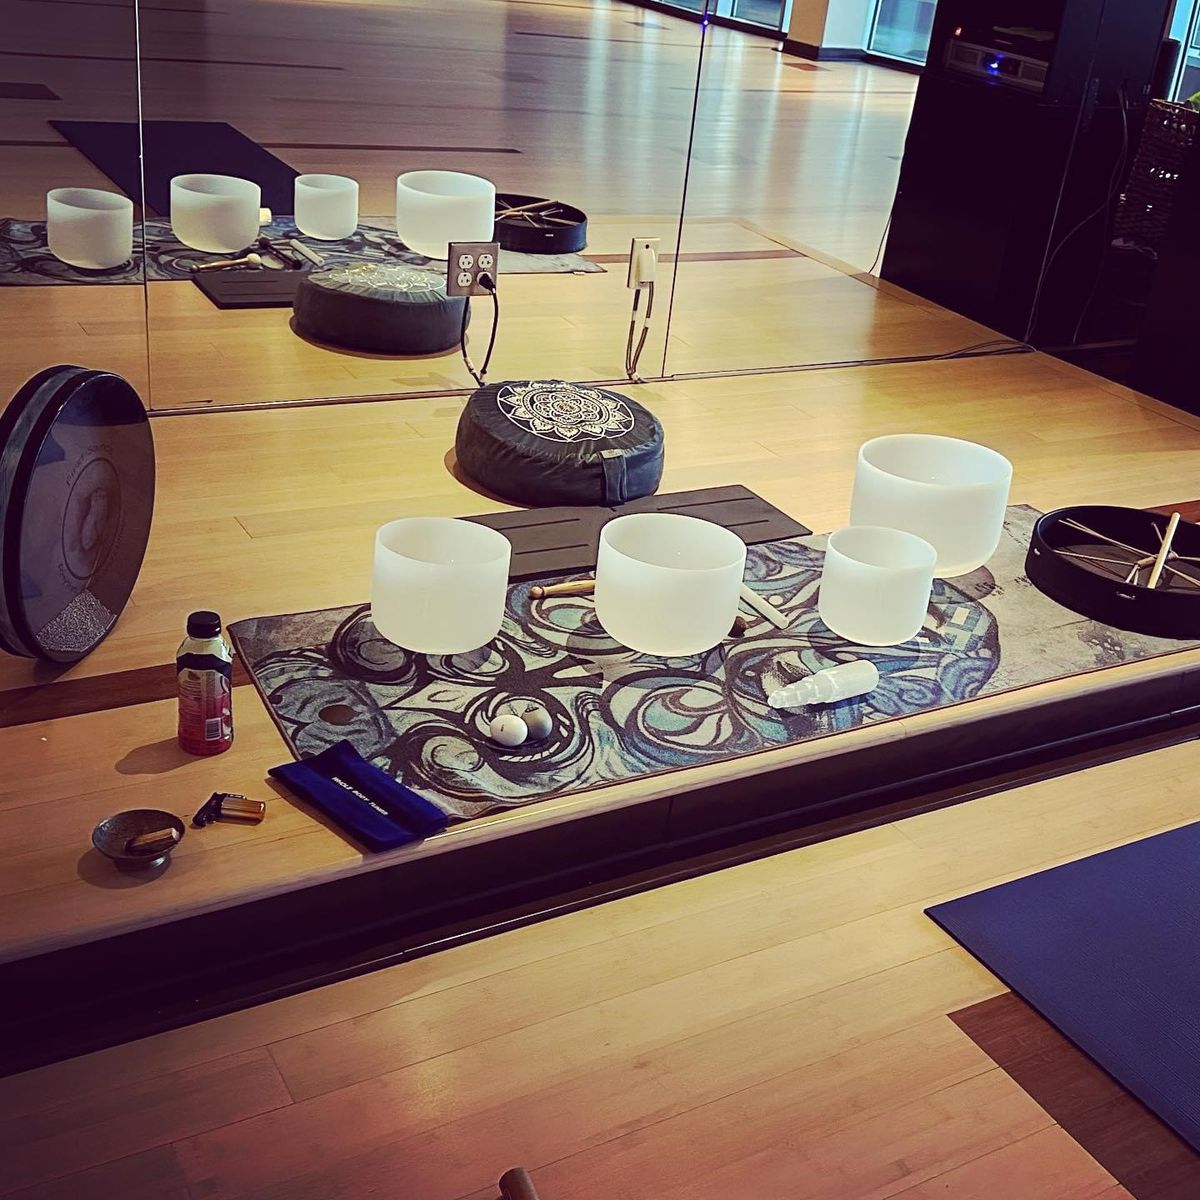 Sound Bath and Gentle Yoga in Covington @ the Collab